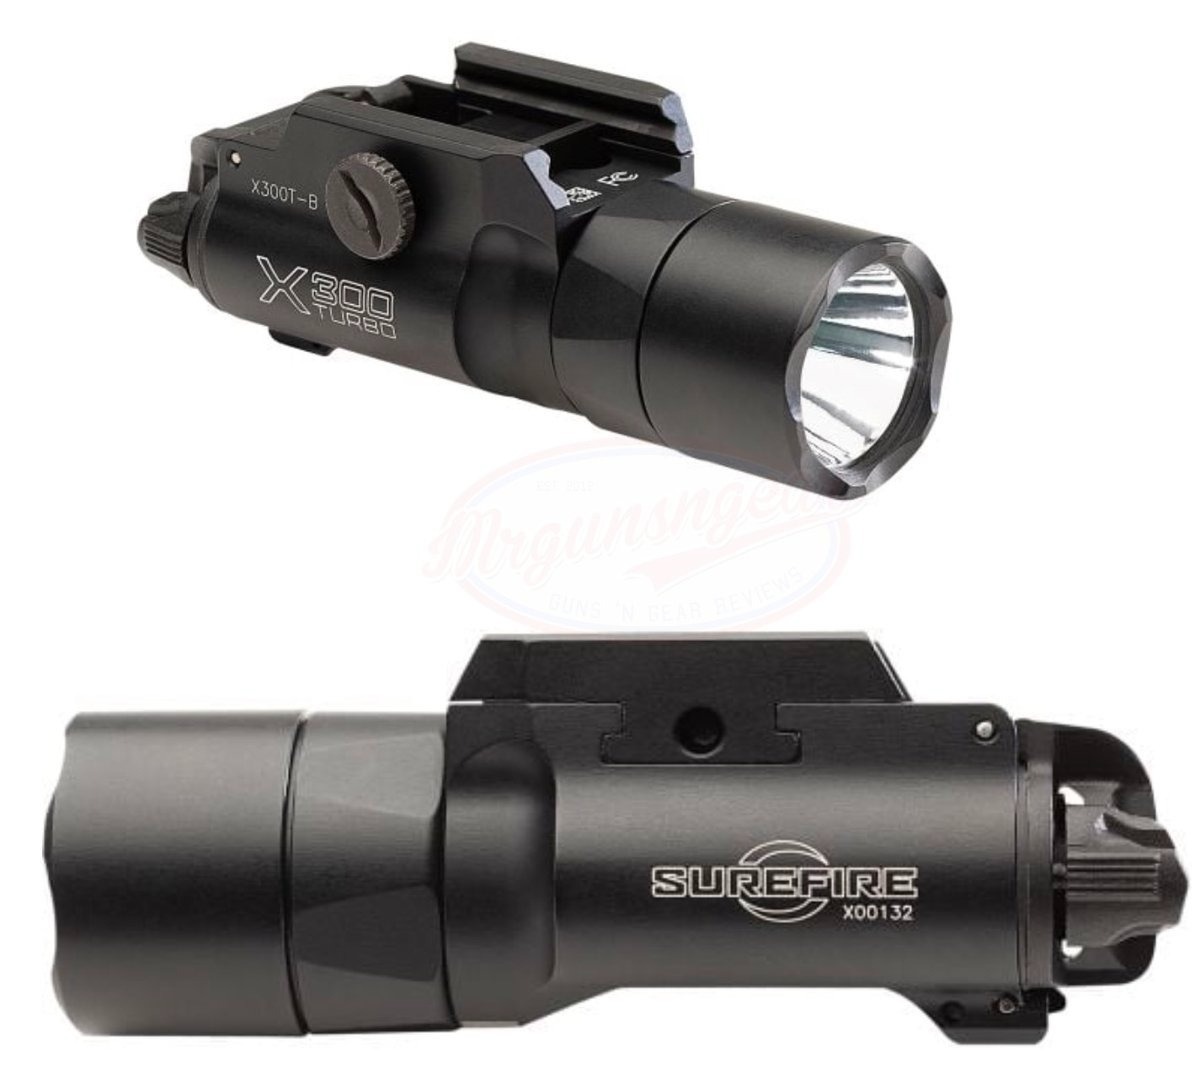 Surefire American made X300B Turbo 650 lumen / 66,000 candela light for $229/ea with code 'TURBO' currently here: mrgunsngear.org/3uCele1 Review is up on the channel; in stock as of this post 🇺🇸🔦